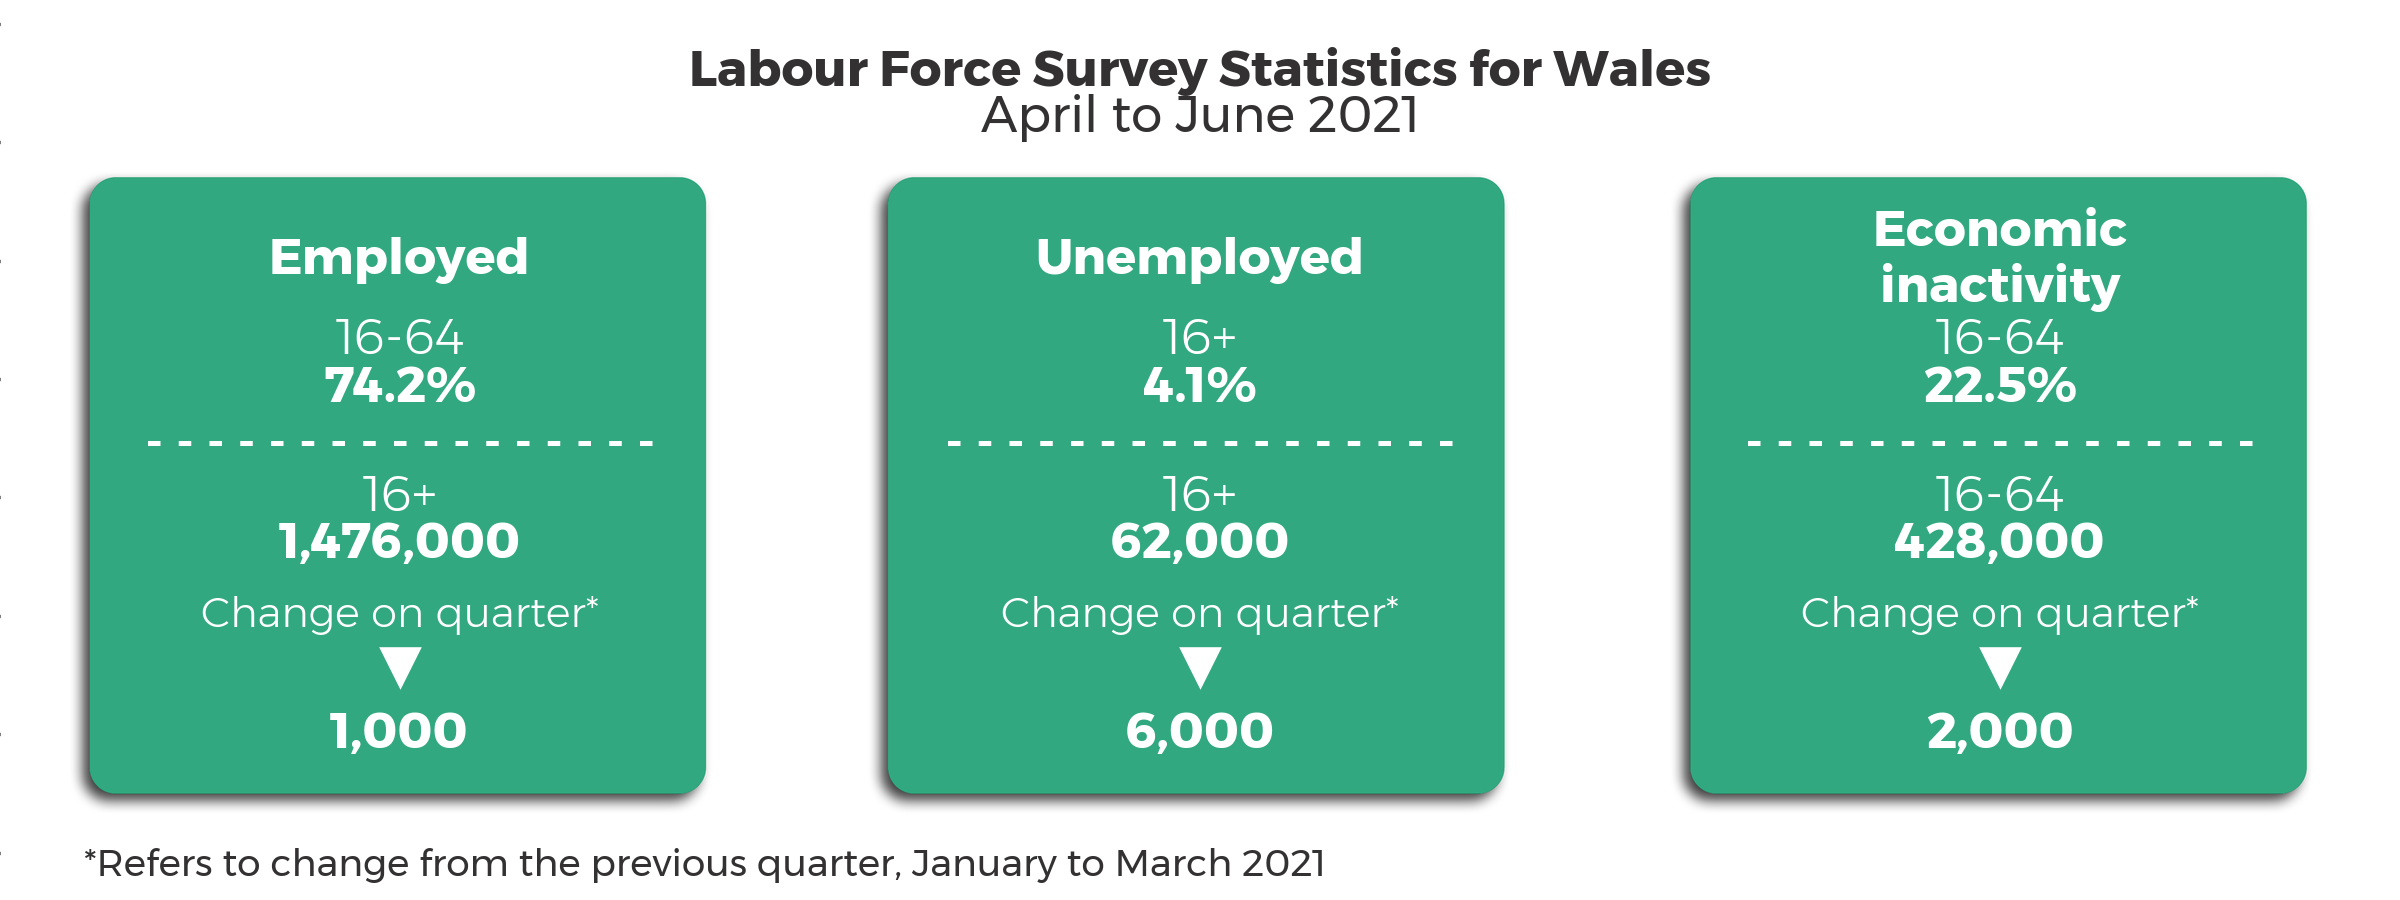 Headline statistics April 2021 to June 2021 compared to the previous quarter January 2021 to March 2021. The 16+ unemployment rate is 4.1% with 62,000 people unemployed, a decrease of 6,000 from the previous quarter. The 16-64 employment rate is 74.2%. 1,476,000 people aged 16+ employed, a decrease of 1,000 from the previous quarter. The 16-64 economic inactivity rate is 22.5% with 428,000 people economically active, a decrease of 2,000 on the previous quarter.